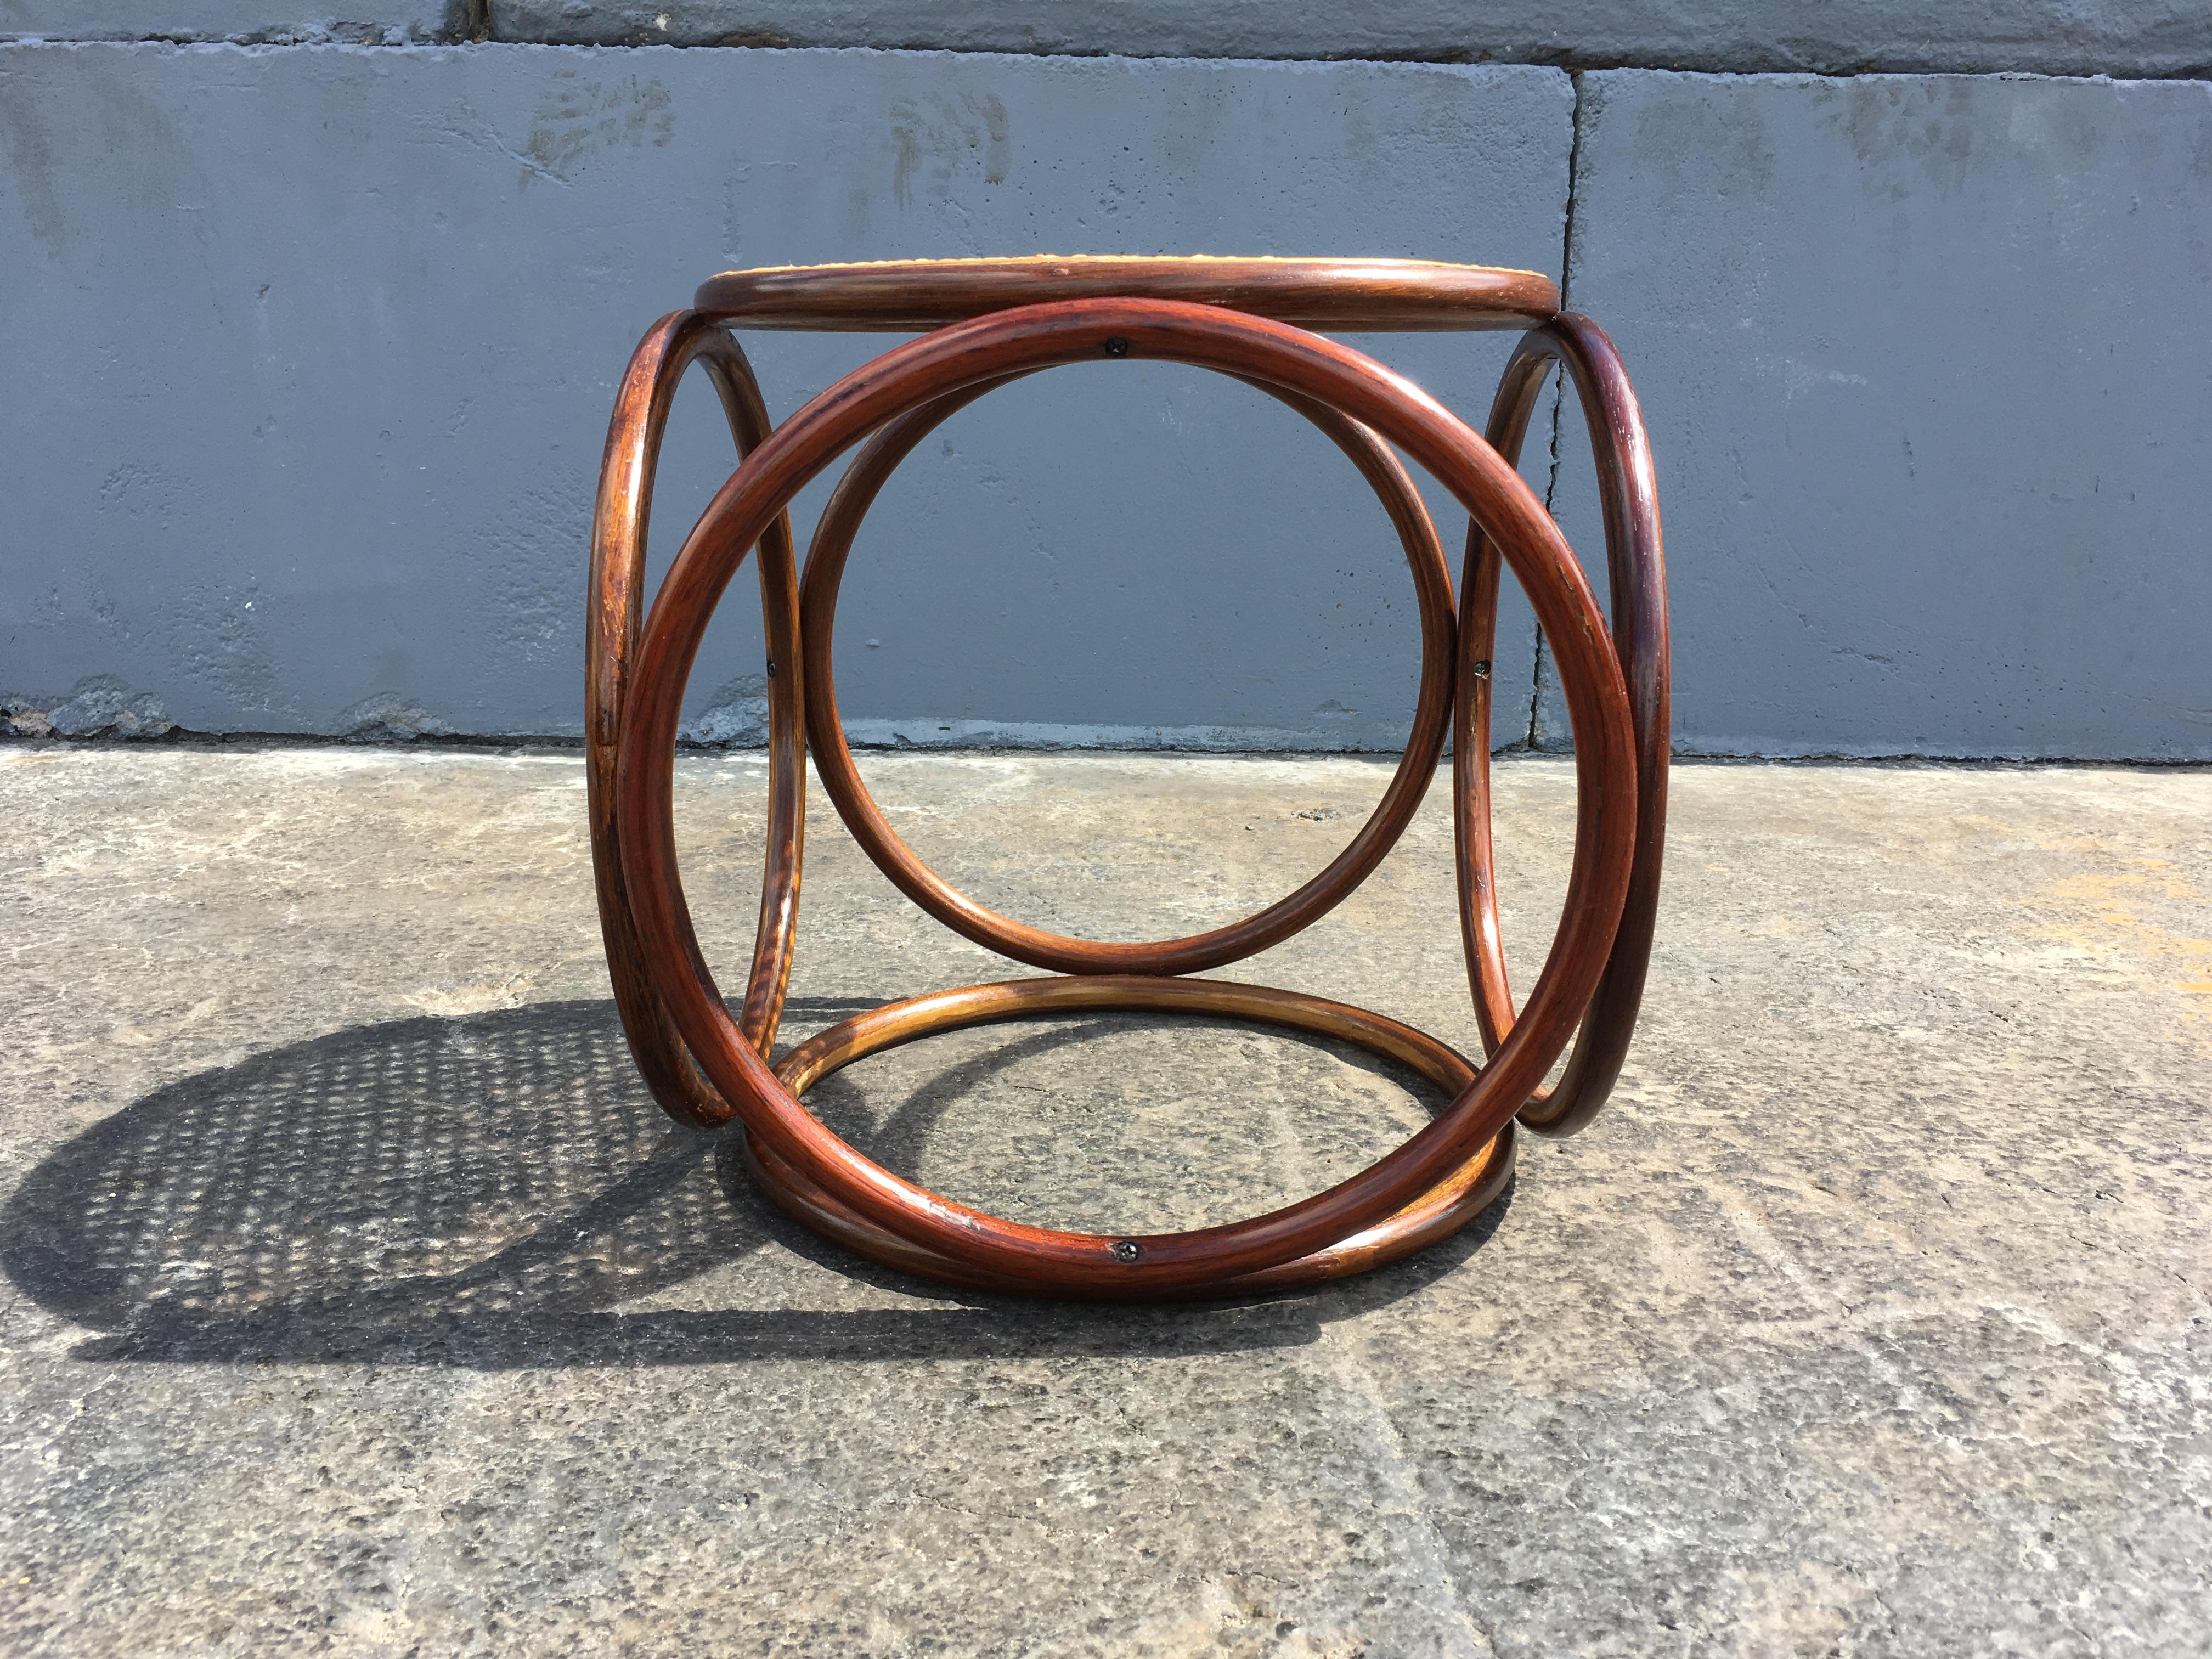 Timeless design, bentwood and cane. Great as stool or side table.